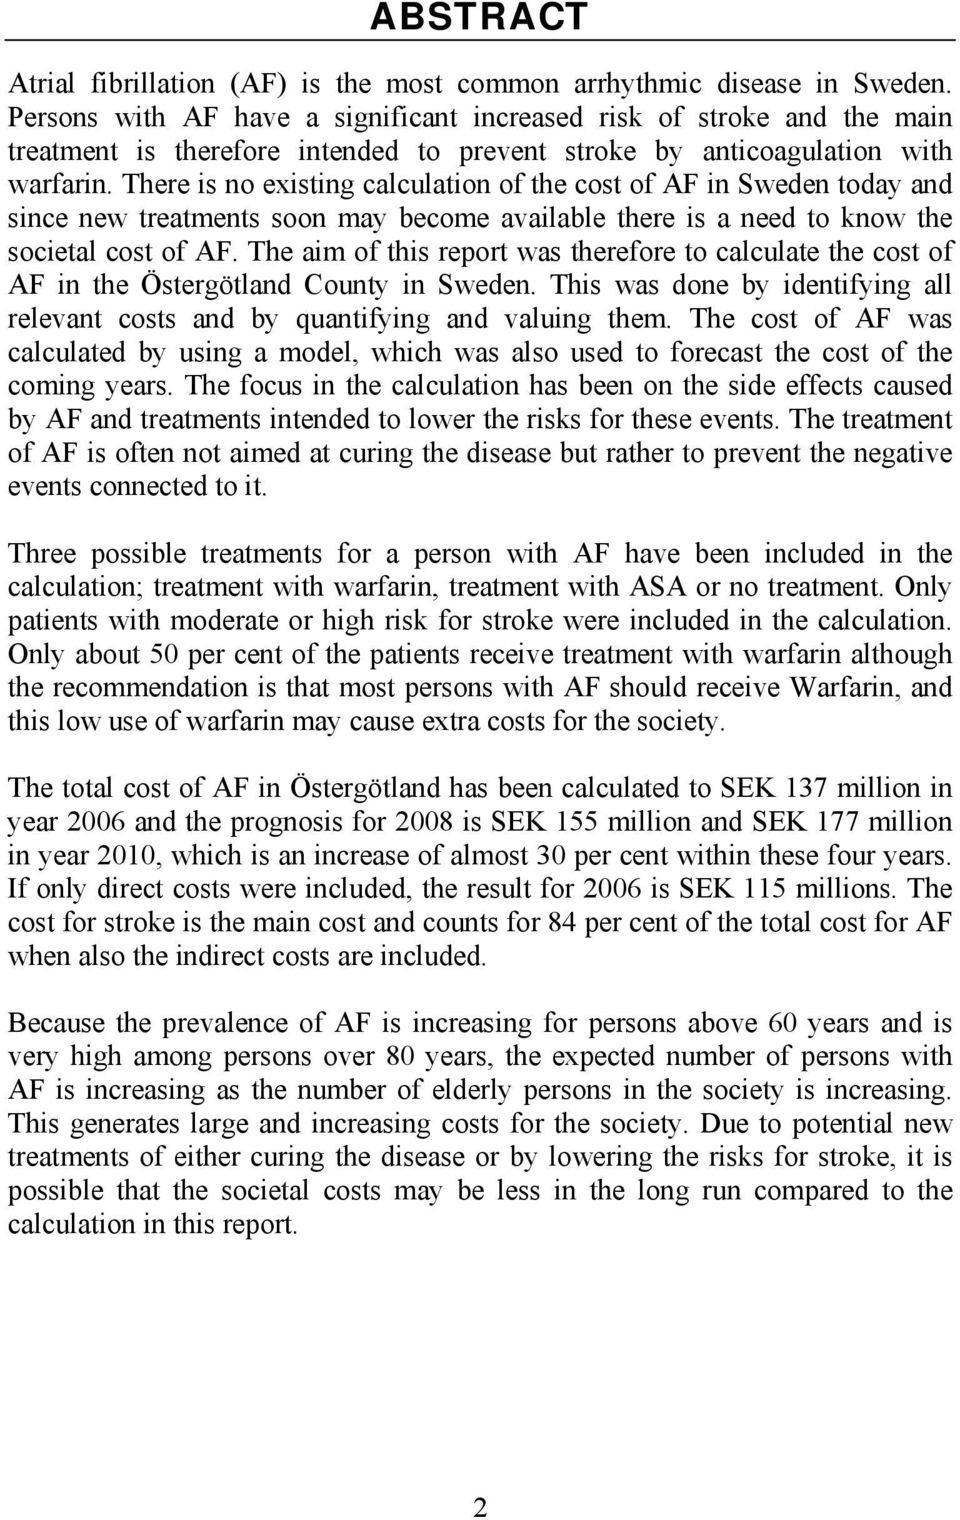 There is no existing calculation of the cost of AF in Sweden today and since new treatments soon may become available there is a need to know the societal cost of AF.